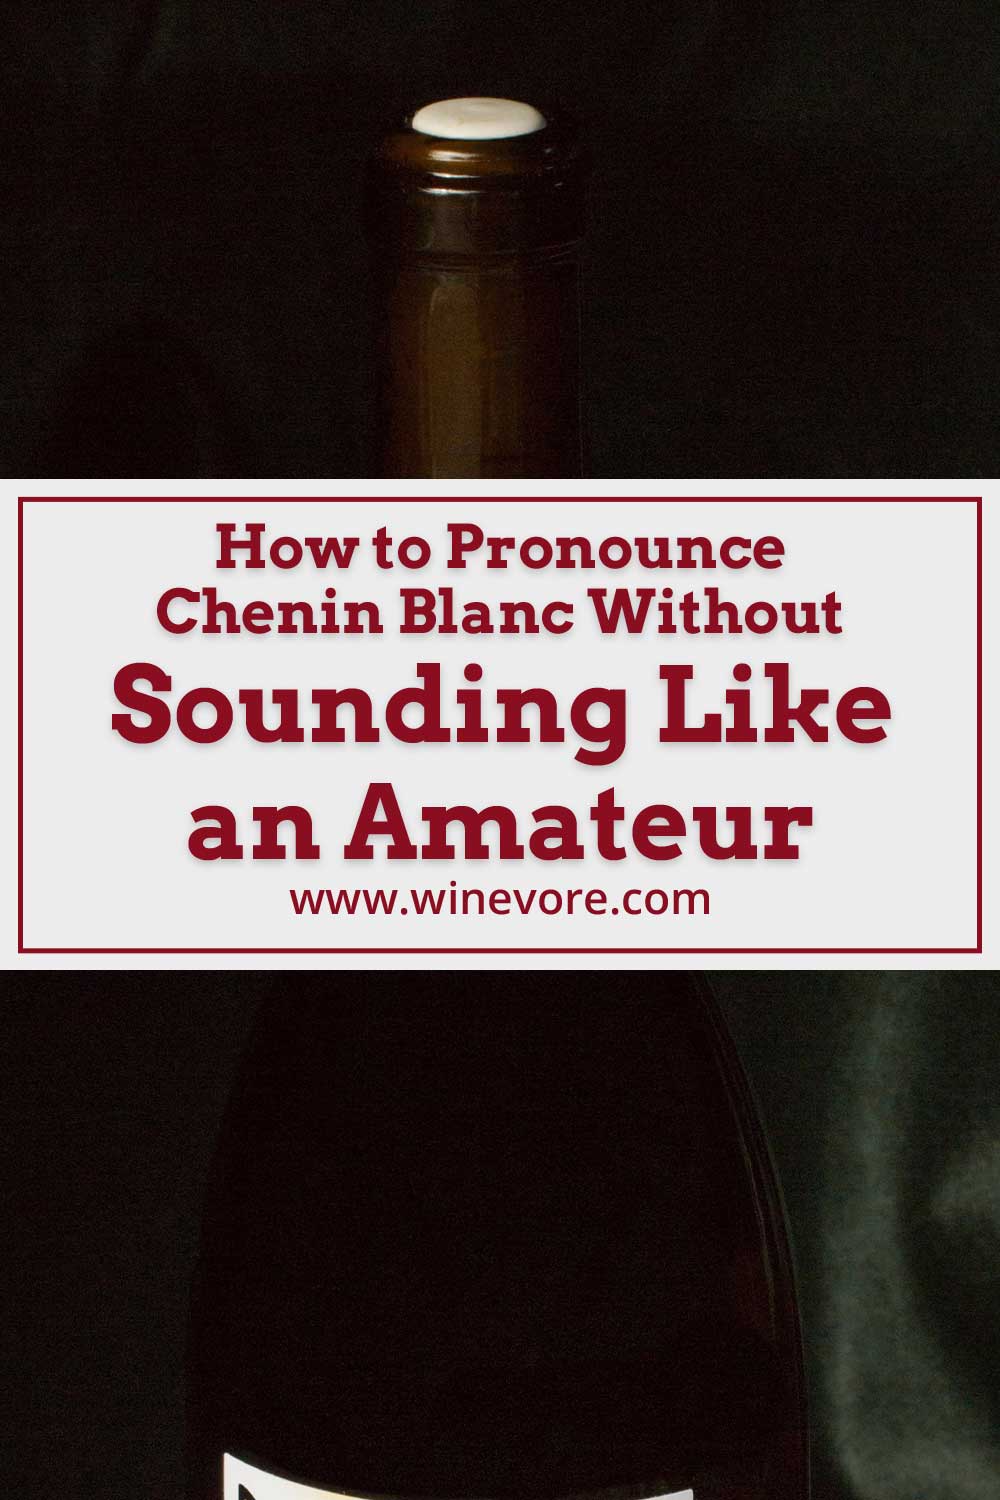 A wine bottle with a white cork - How to Pronounce Chenin Blanc?